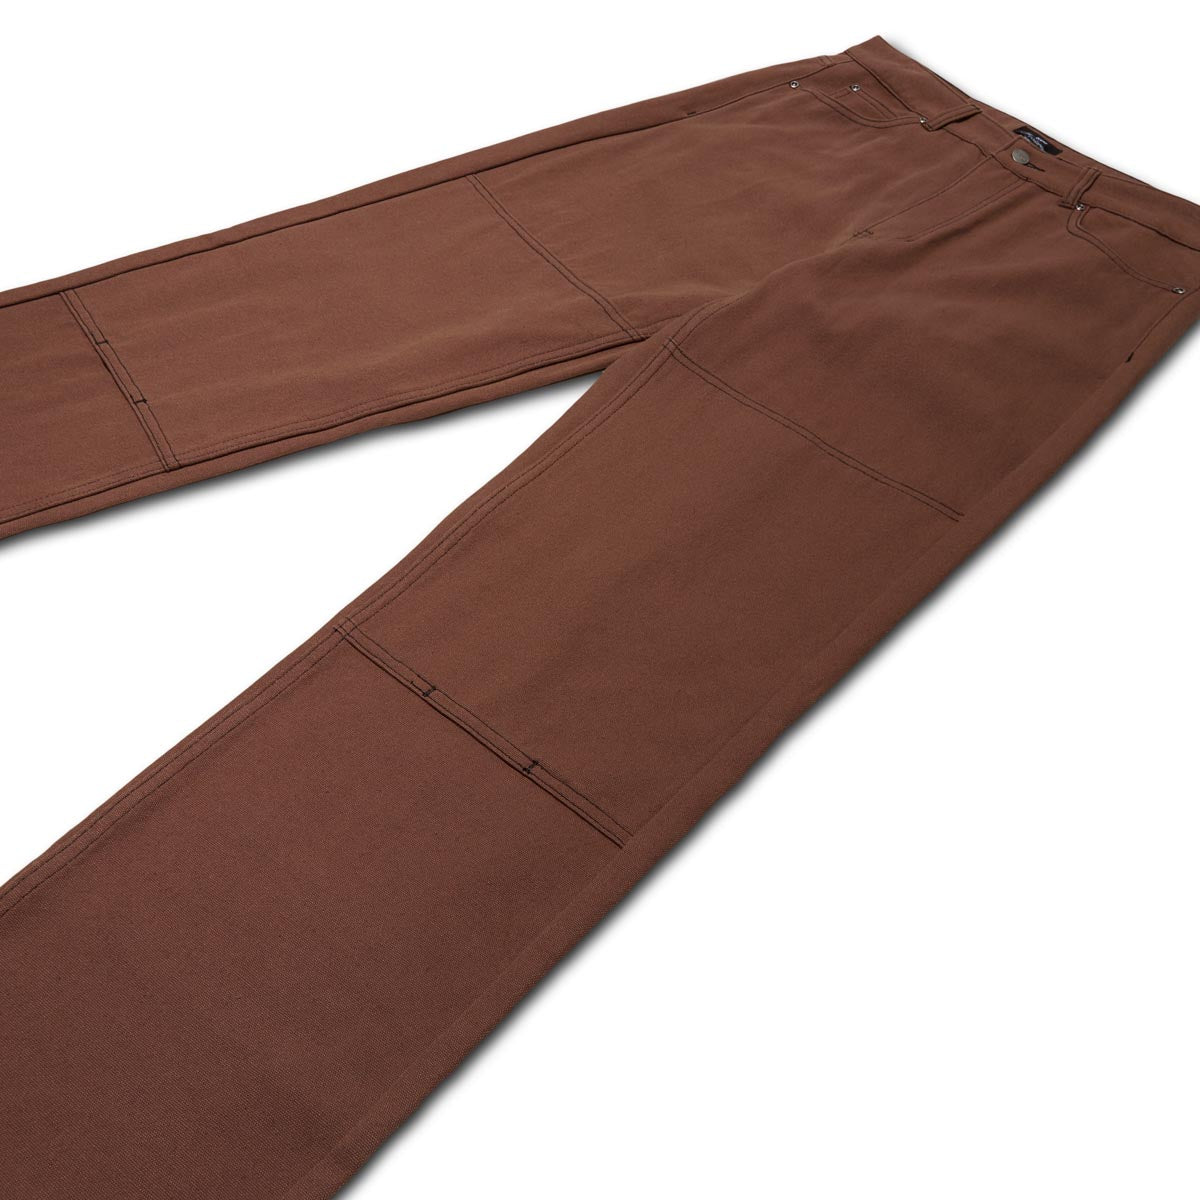 CCS Double Knee Original Relaxed Canvas Pants - Brown/Black image 7